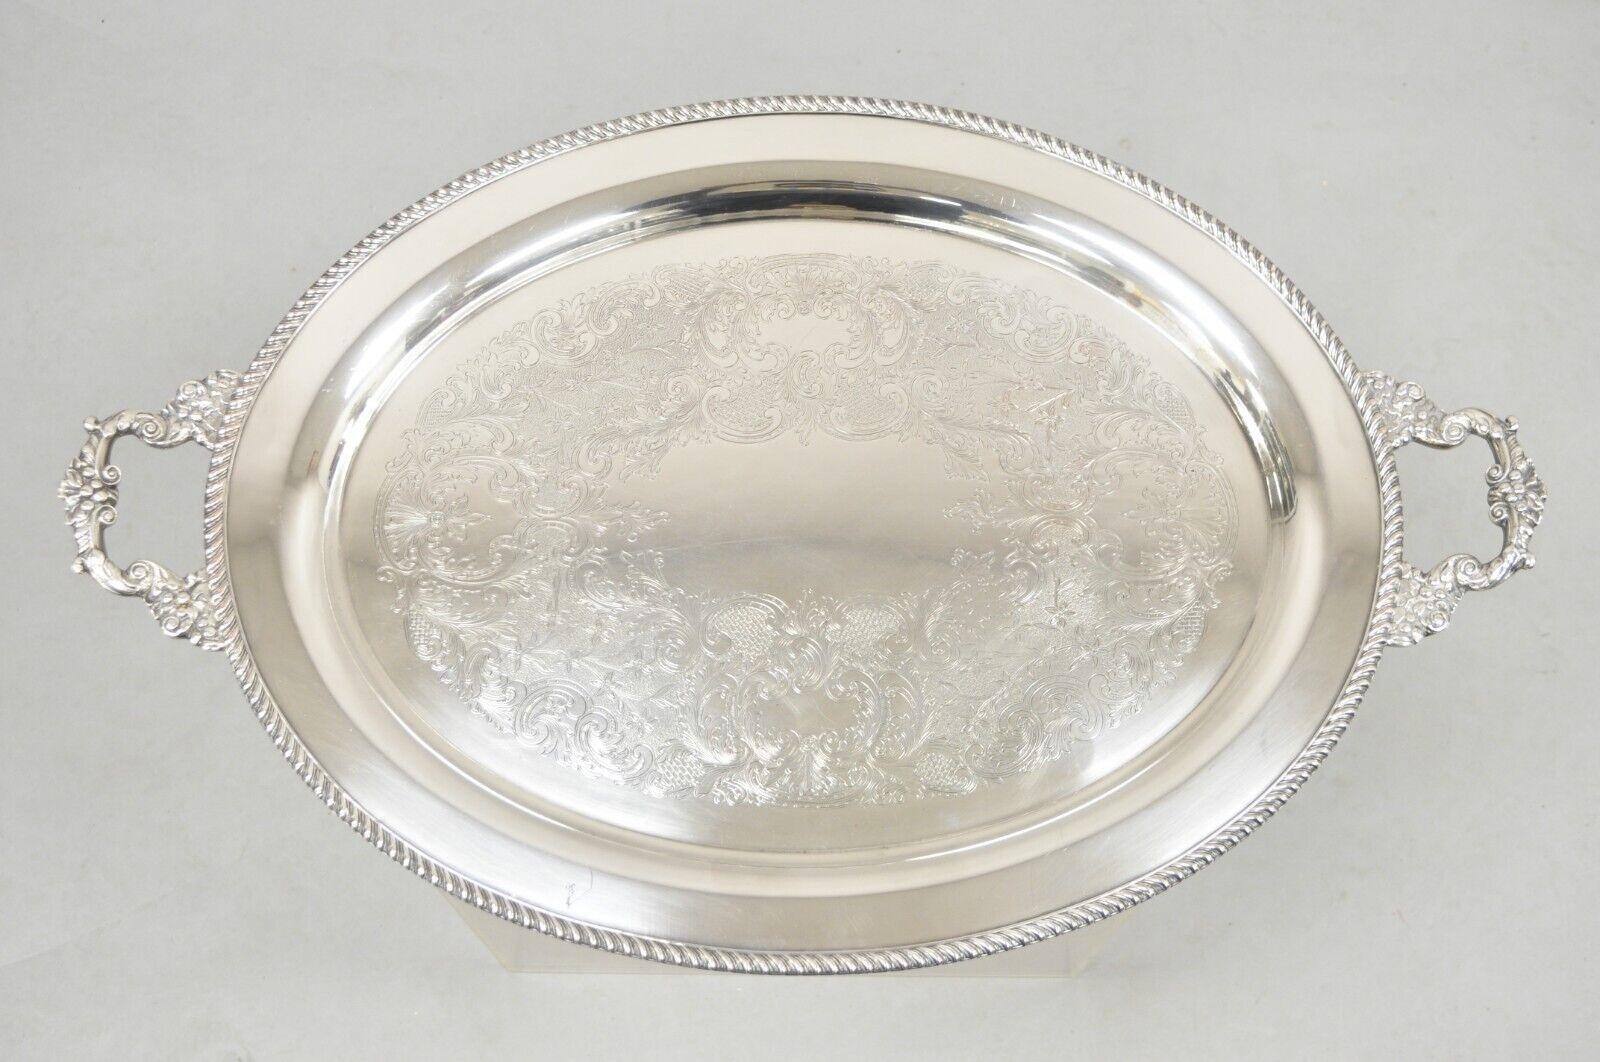 Vtg English Victorian Large Oval Silver Plated Serving Platter Tray by Victoria For Sale 6